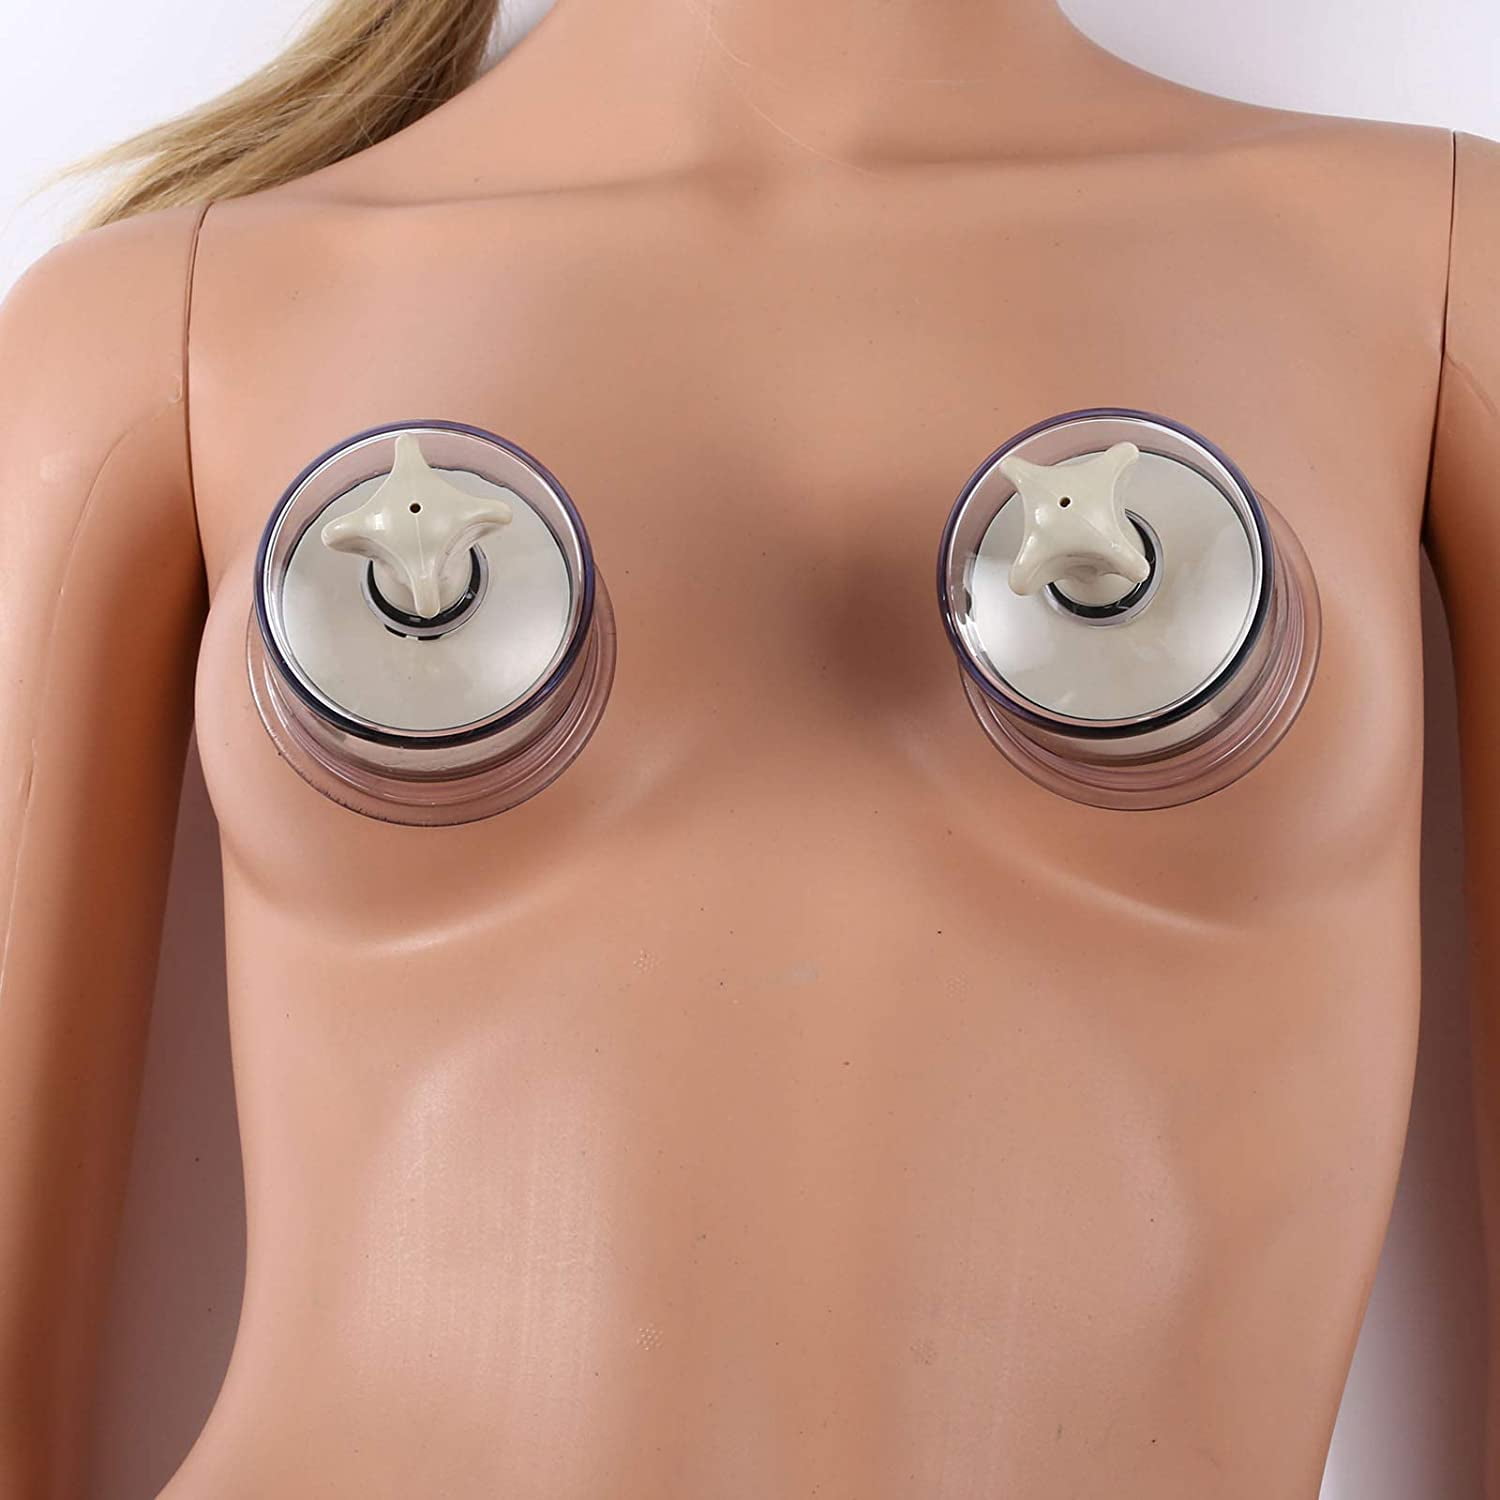 chantel hyatt recommends nipple suction cups pic